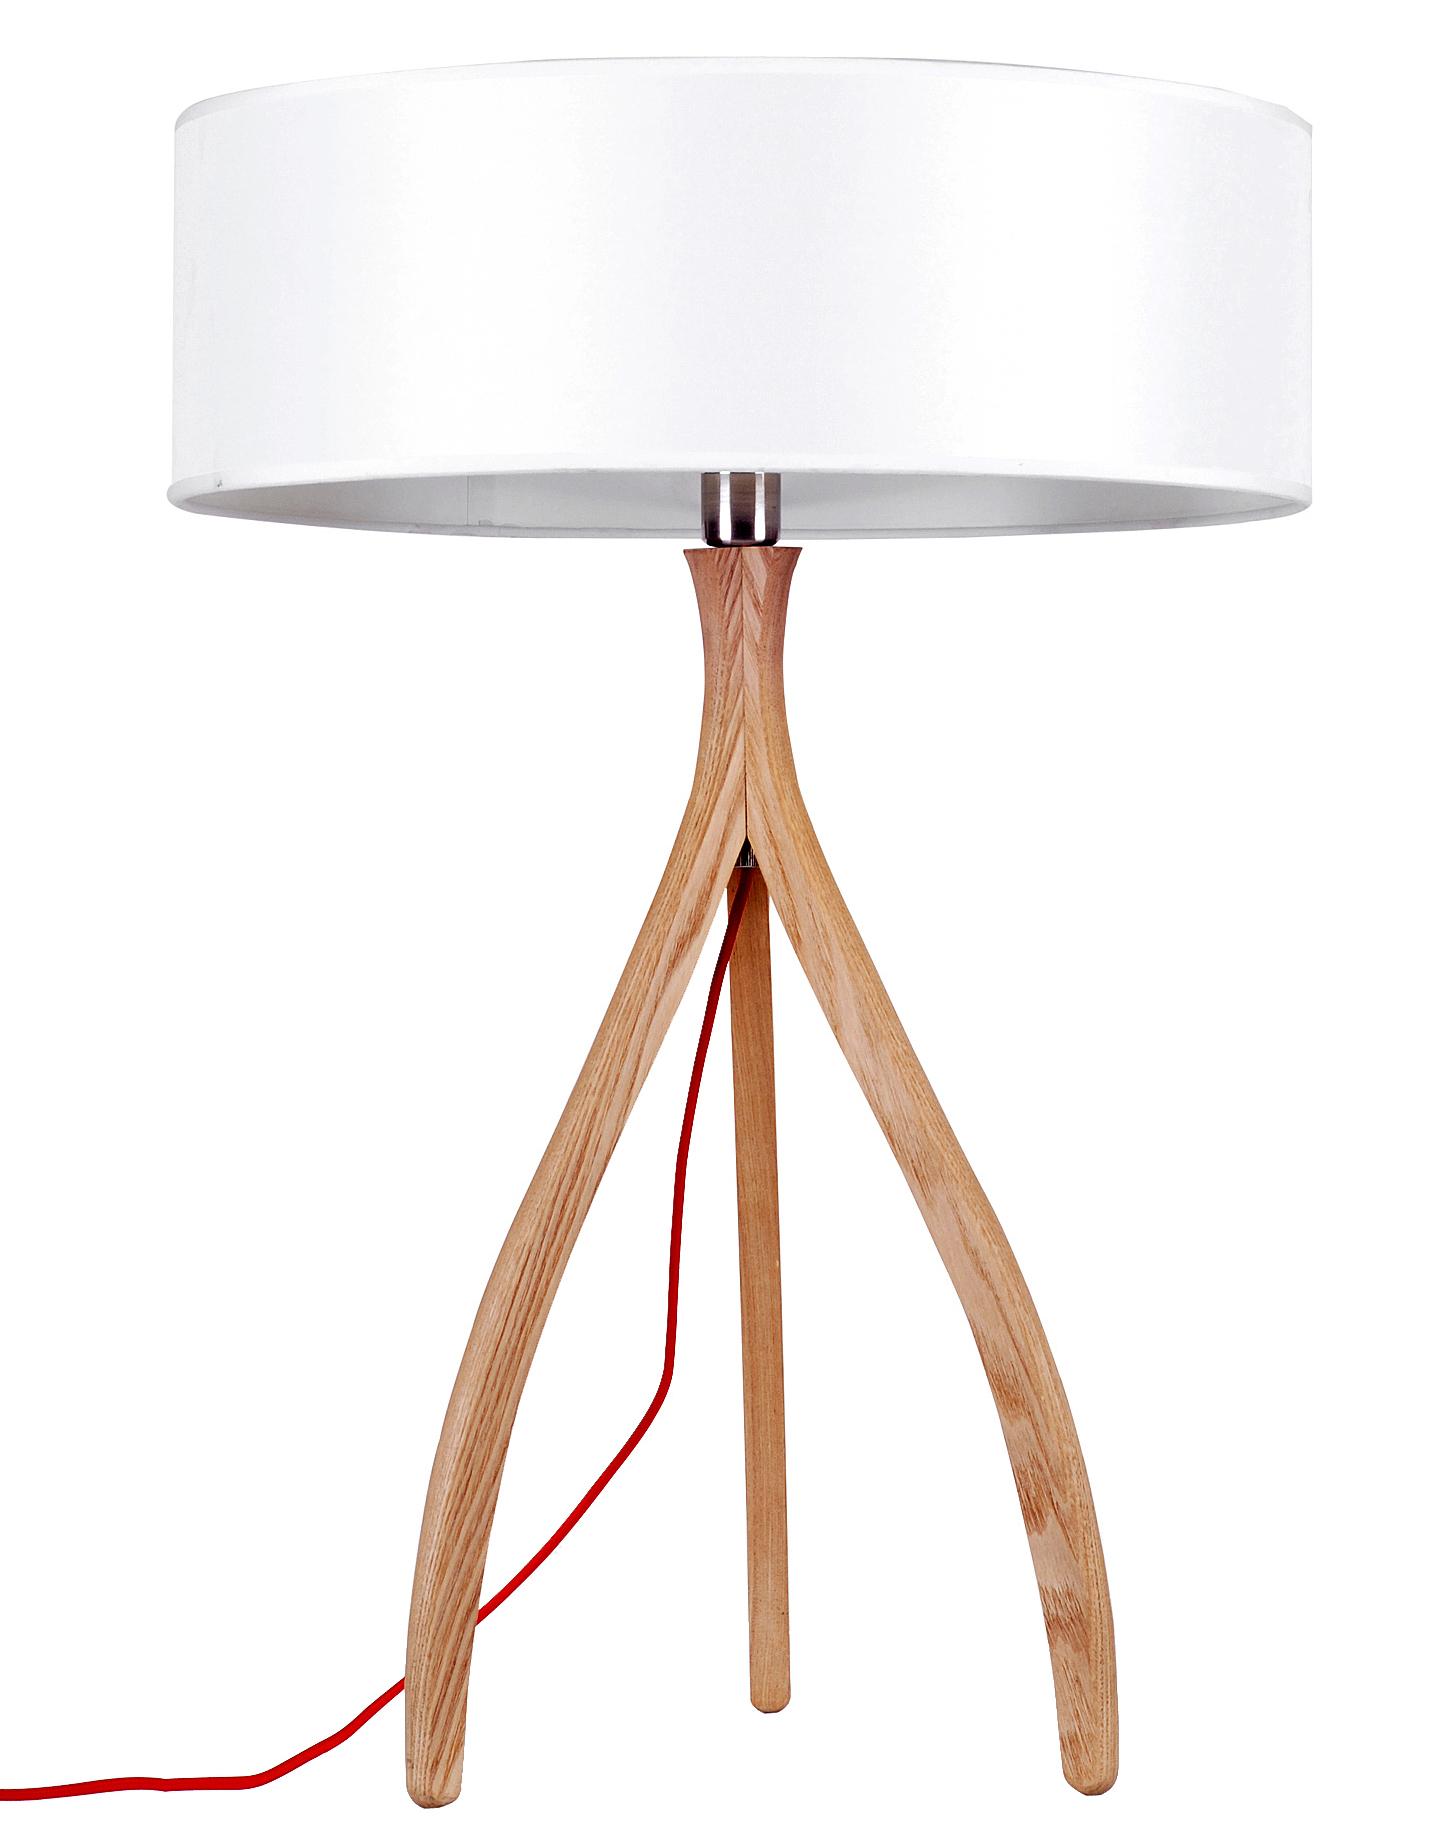 Creative wooden table lamp